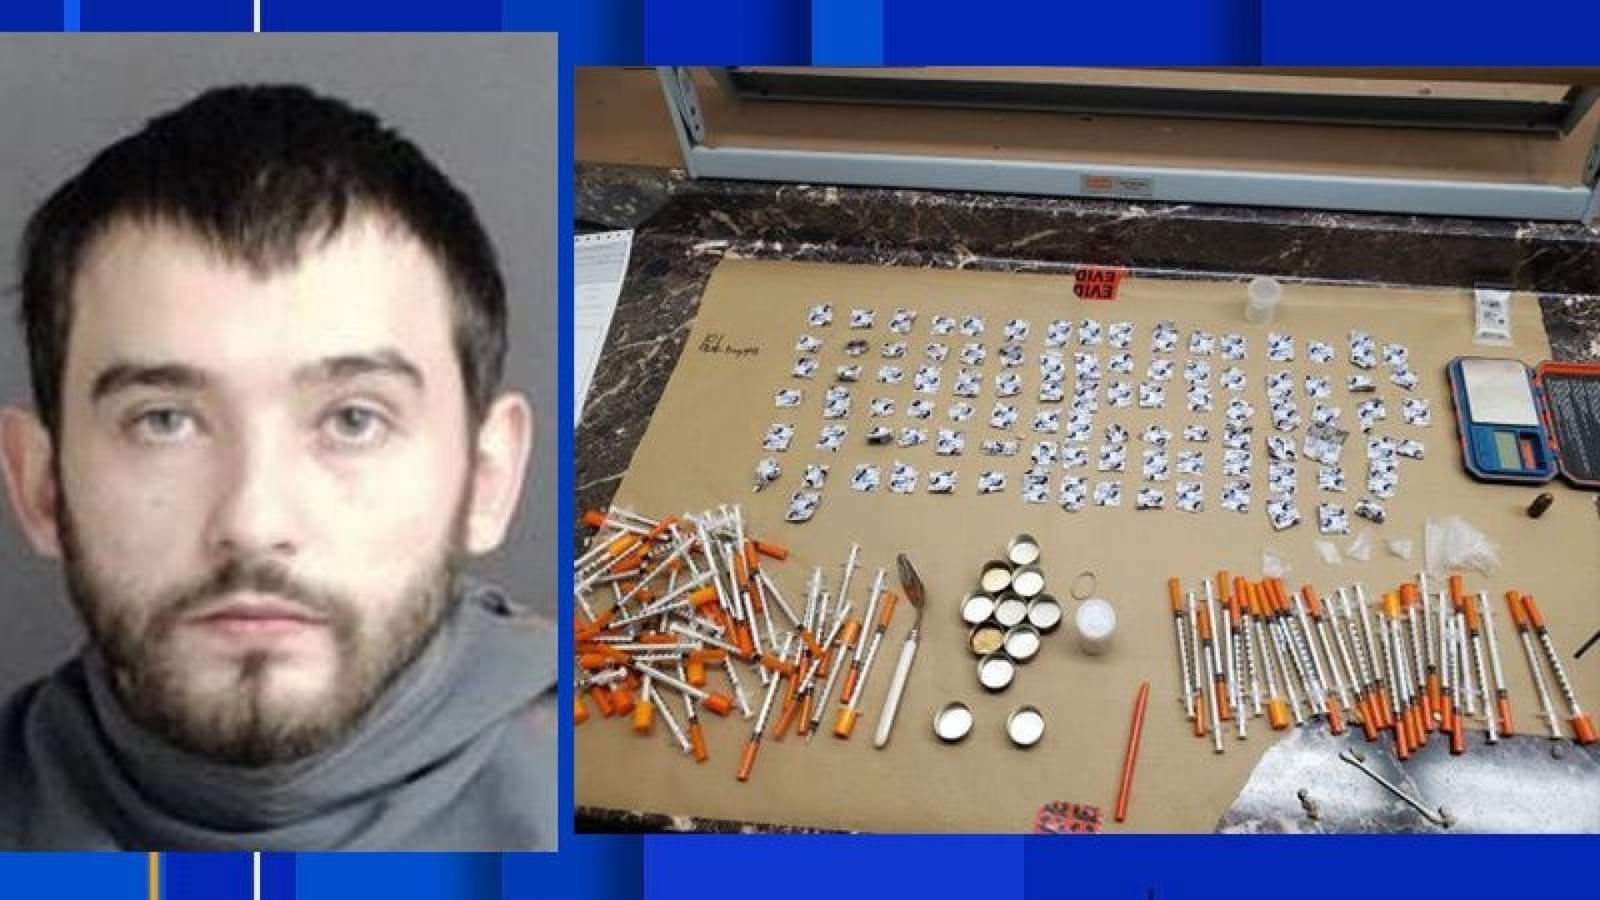 Franklin County man arrested with about 100 baggies of heroin in his car, authorities say